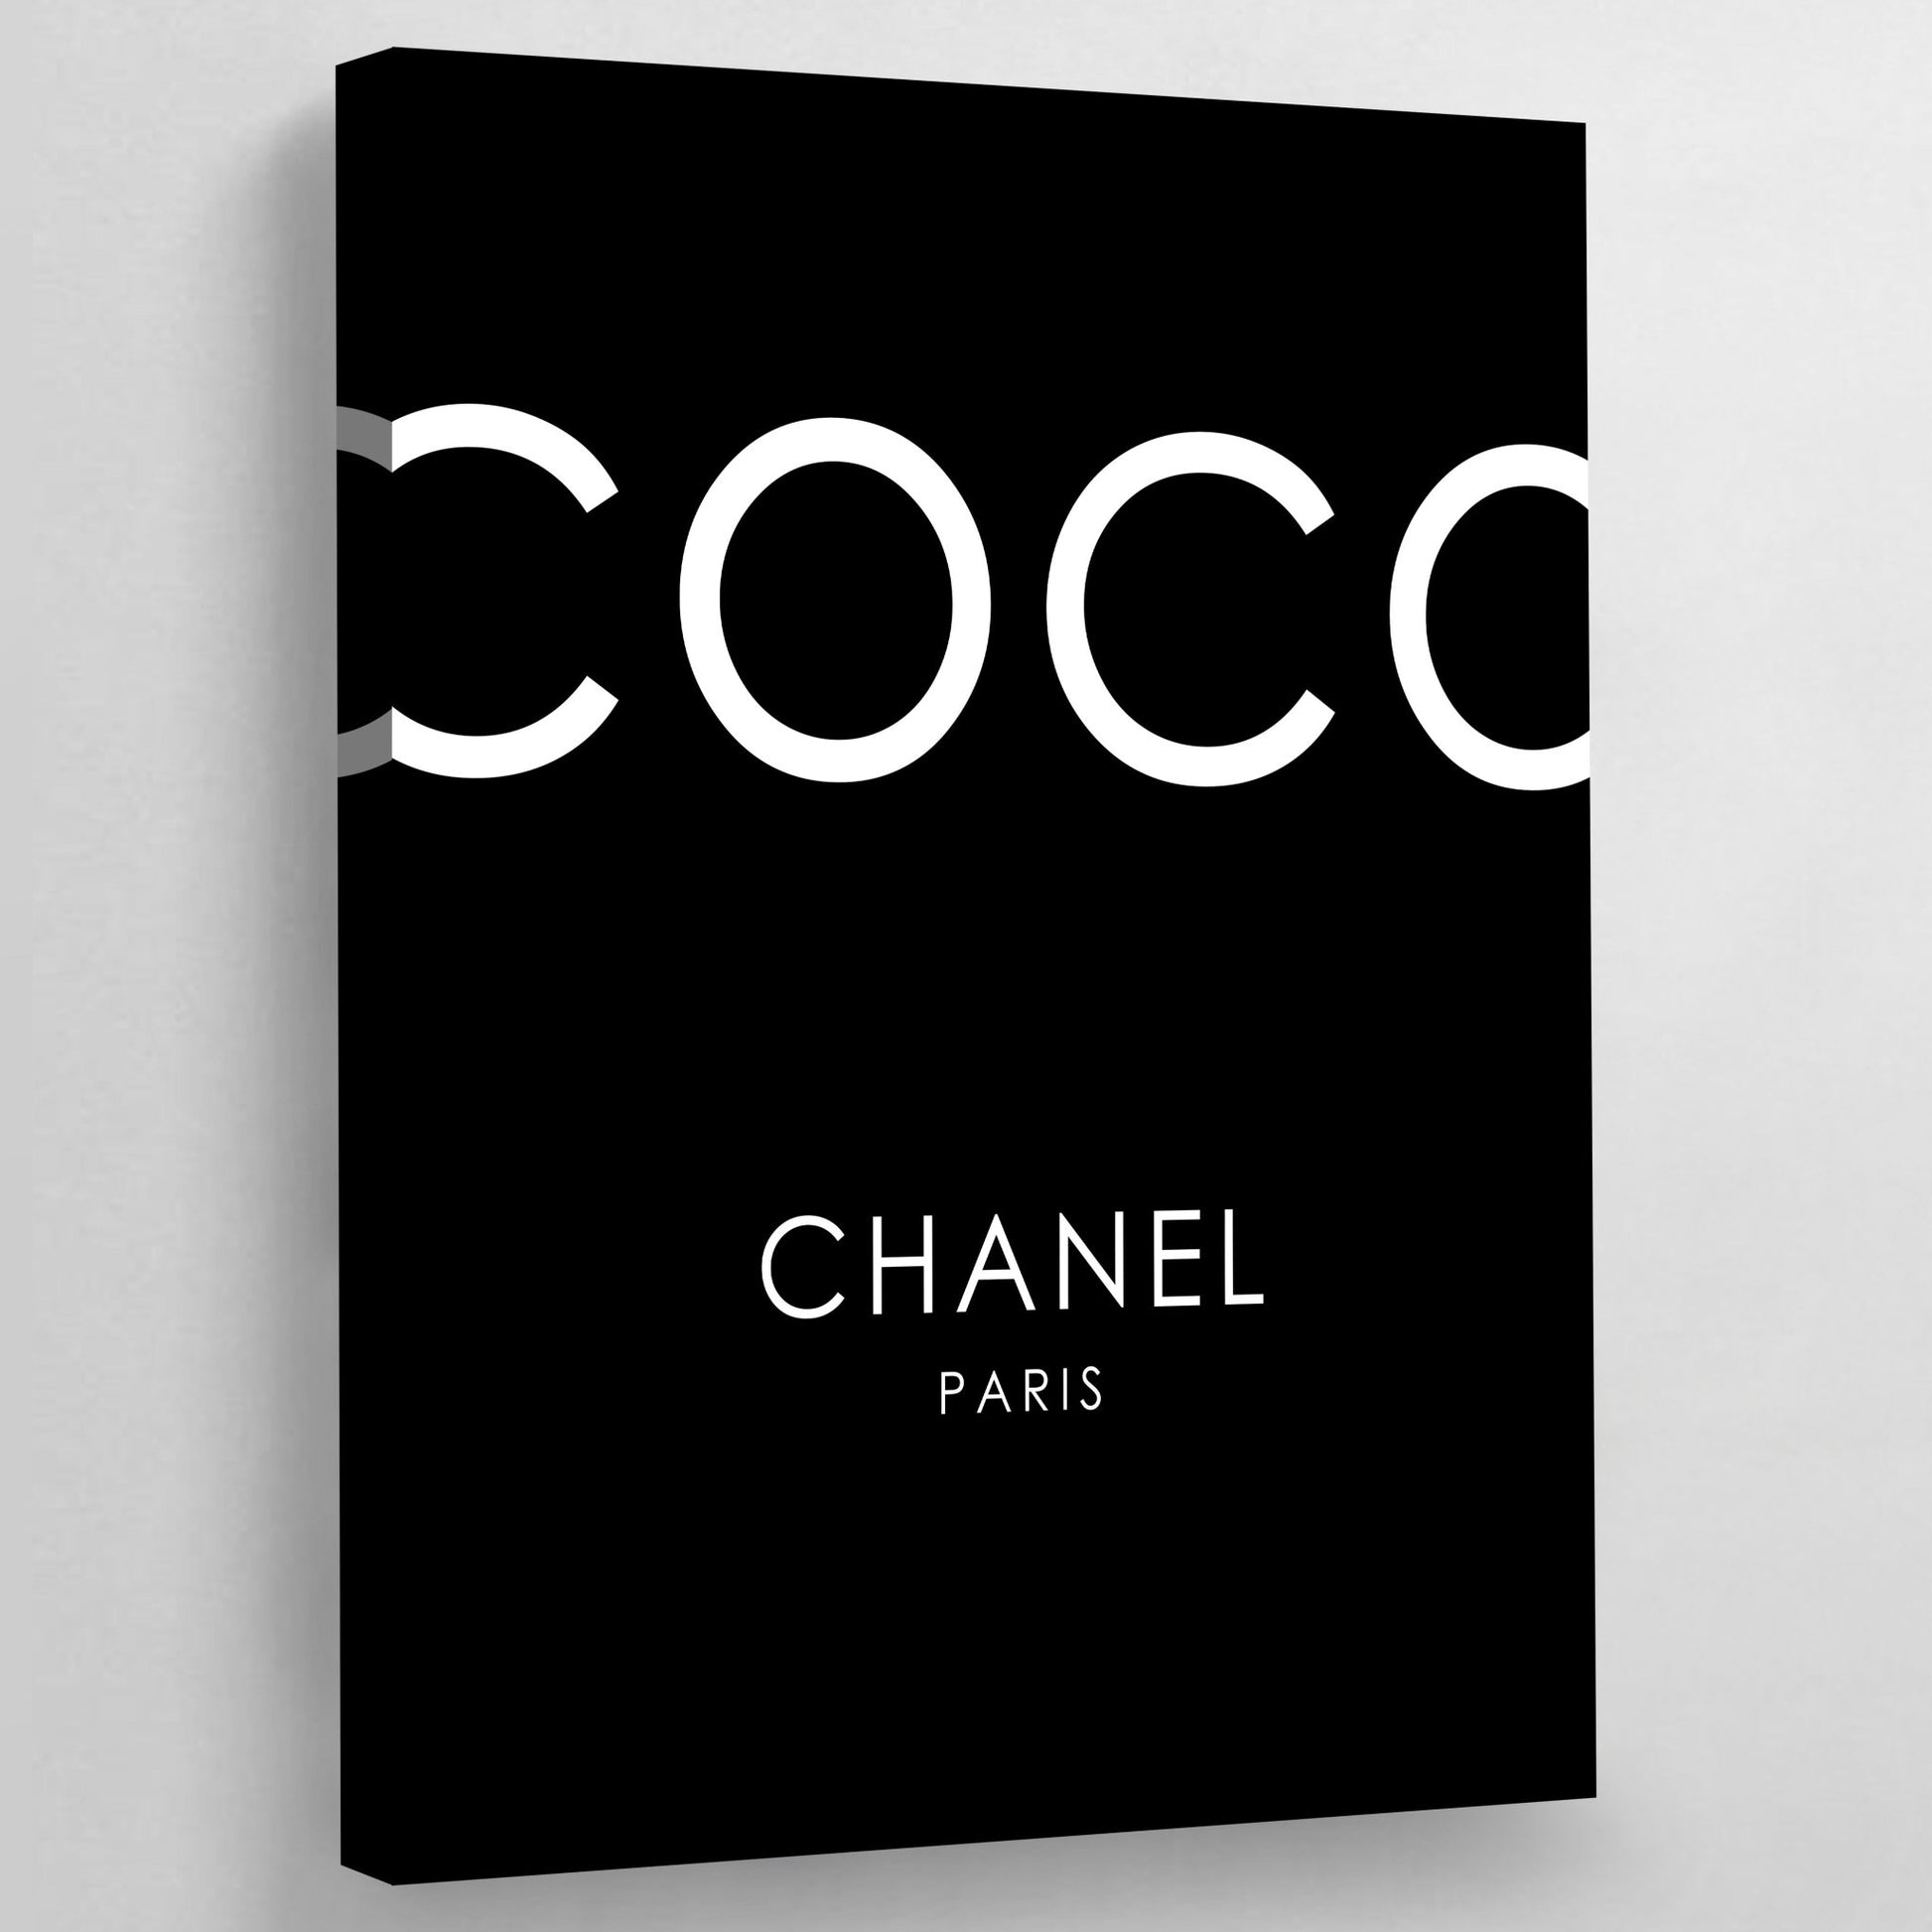 Coco Chanel Frame 